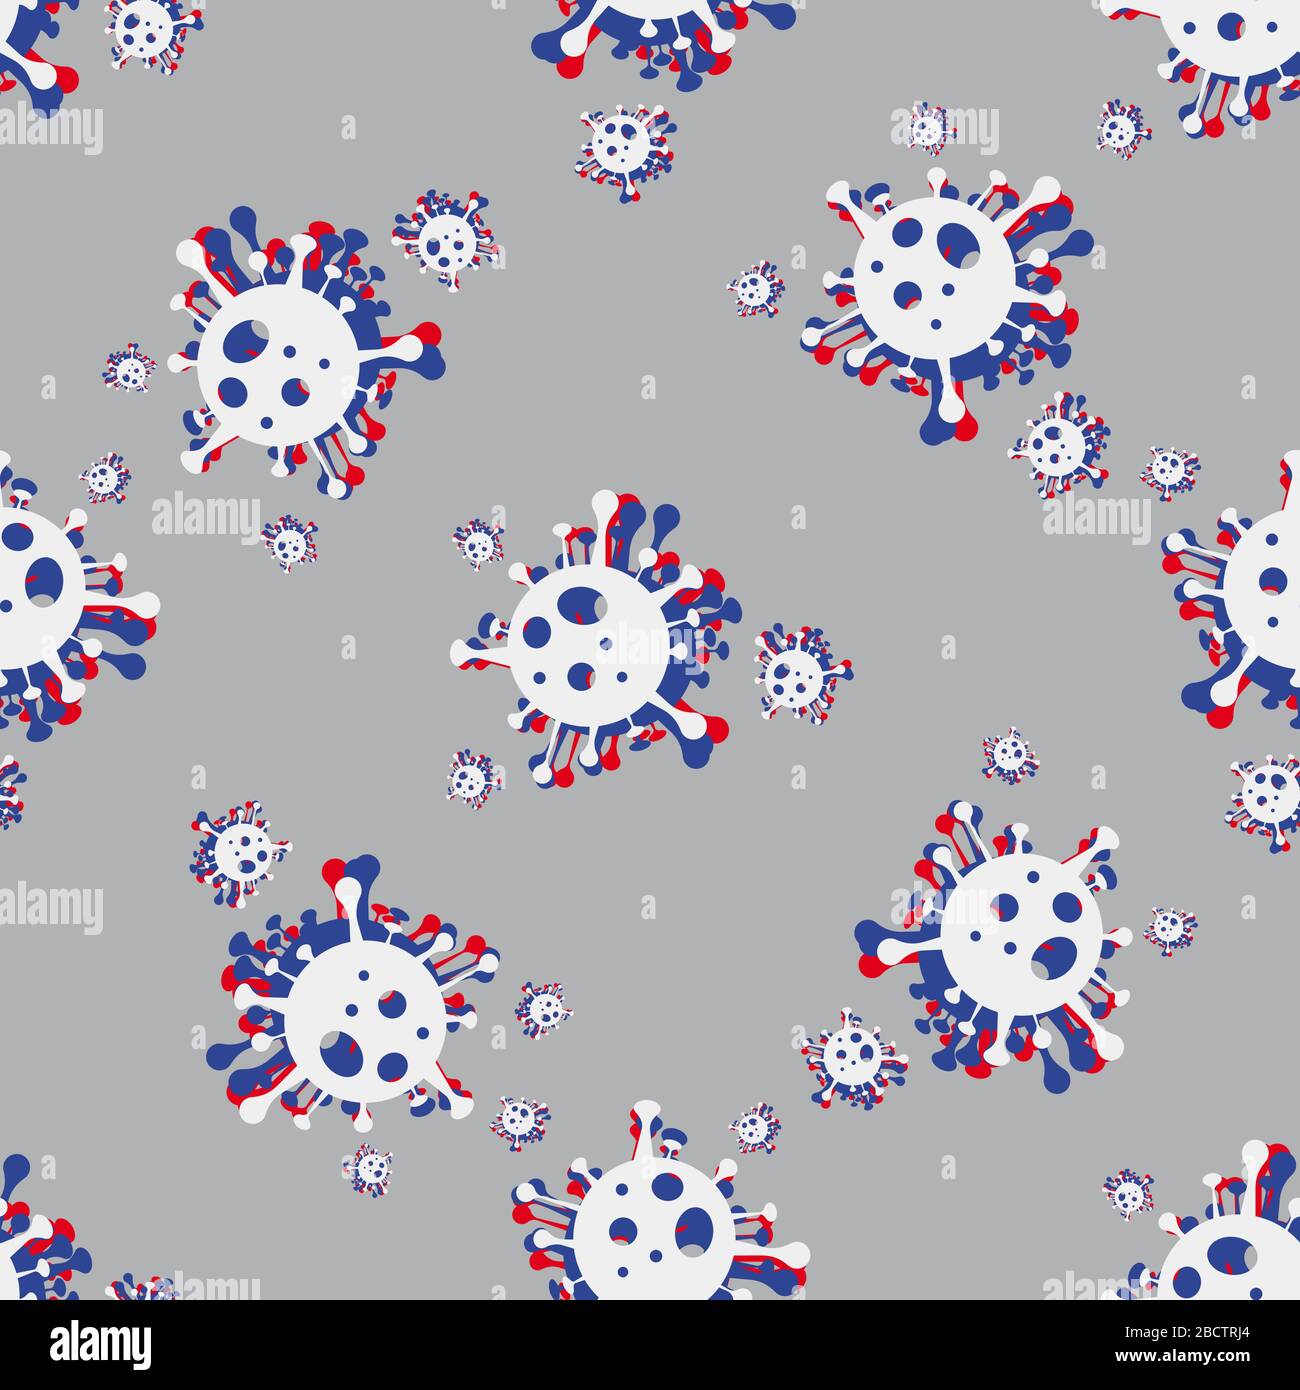 stereo seamless pattern of a bacterium virus Coronavirus COVID-19 . Virus bacteria Virus Covid 19-NCP Stock Vector